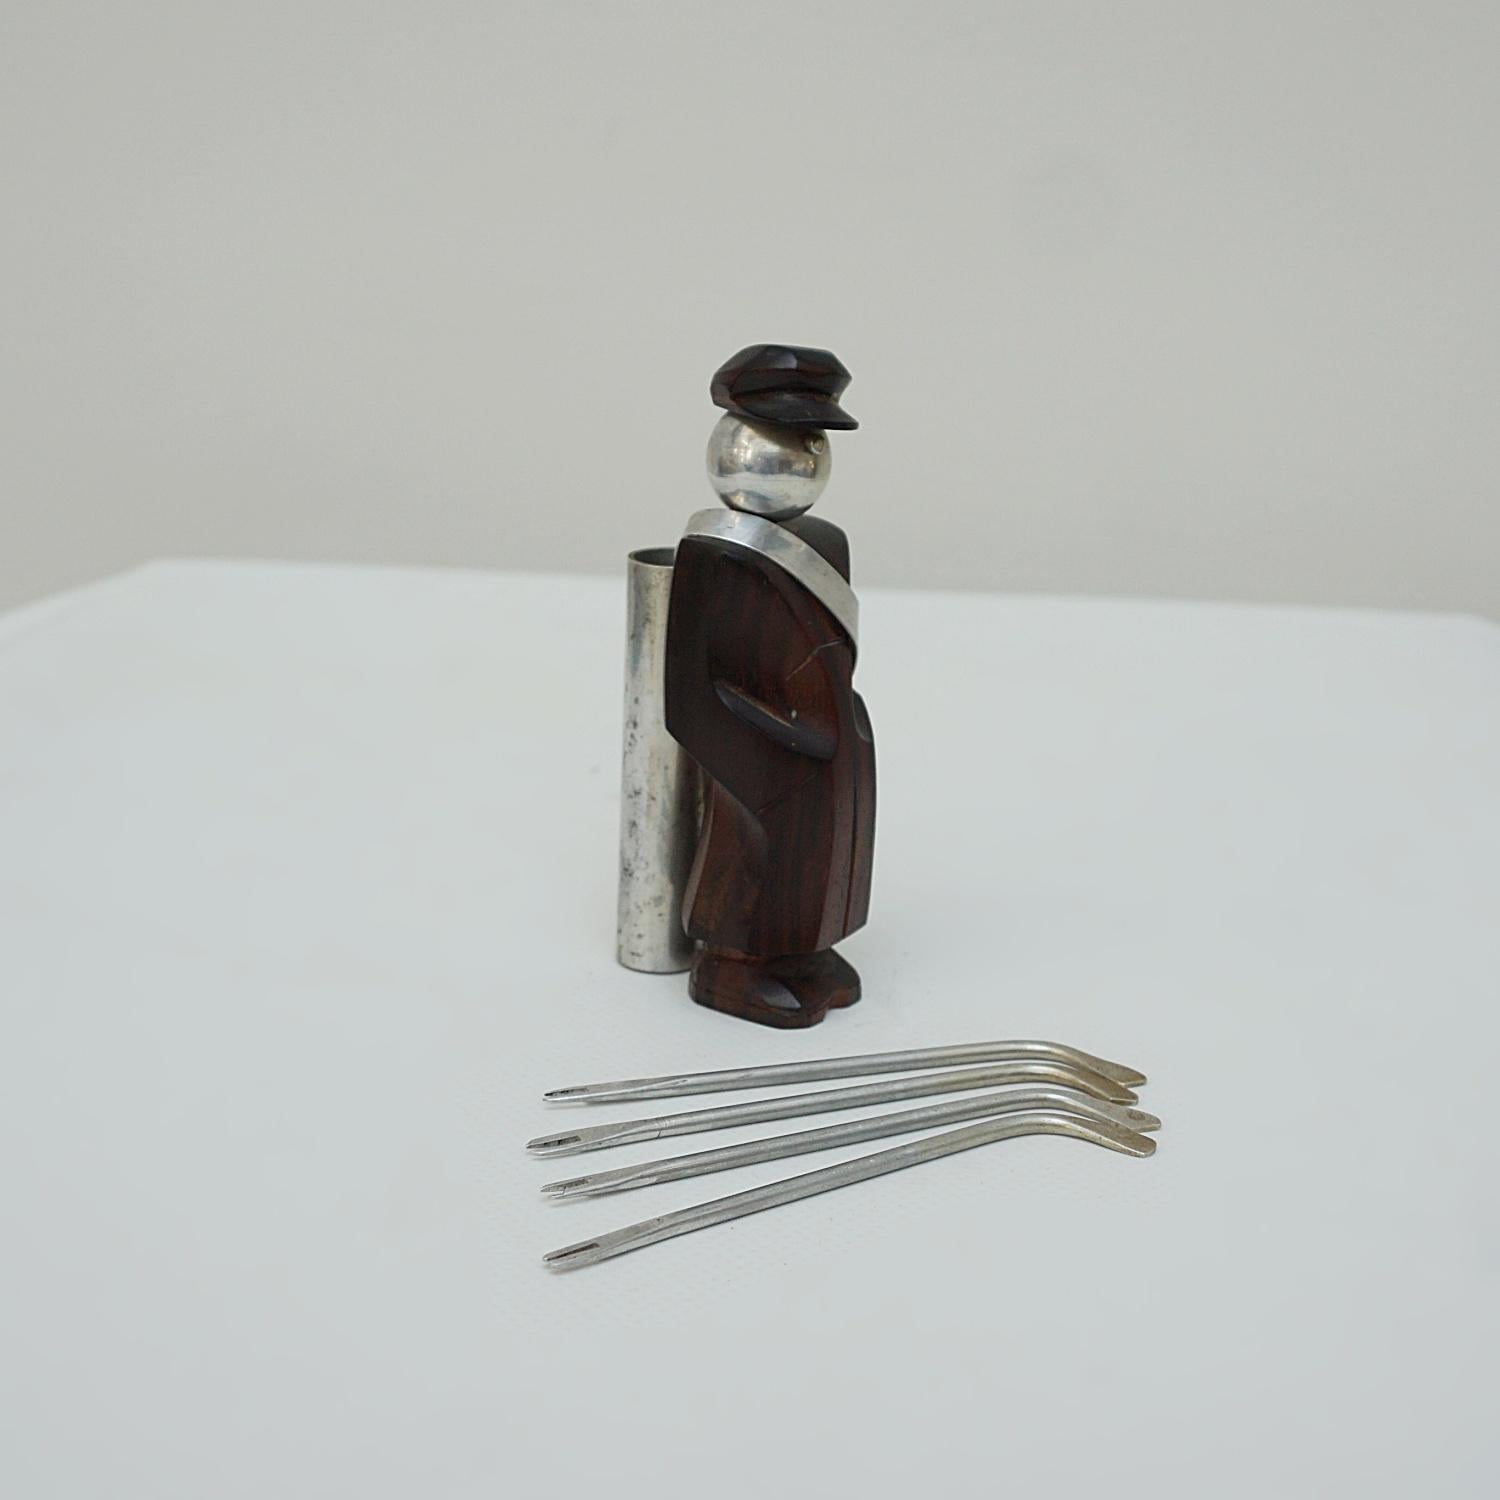 An Art Deco golf caddie cocktail pick holder. Macassar ebony and metal, stamped 'made in France' to underside.

Dimensions: H 11cm W 3.5cm D 5 cm

Origin: France 

Date: Circa 1930's

Item Number: 1006234.